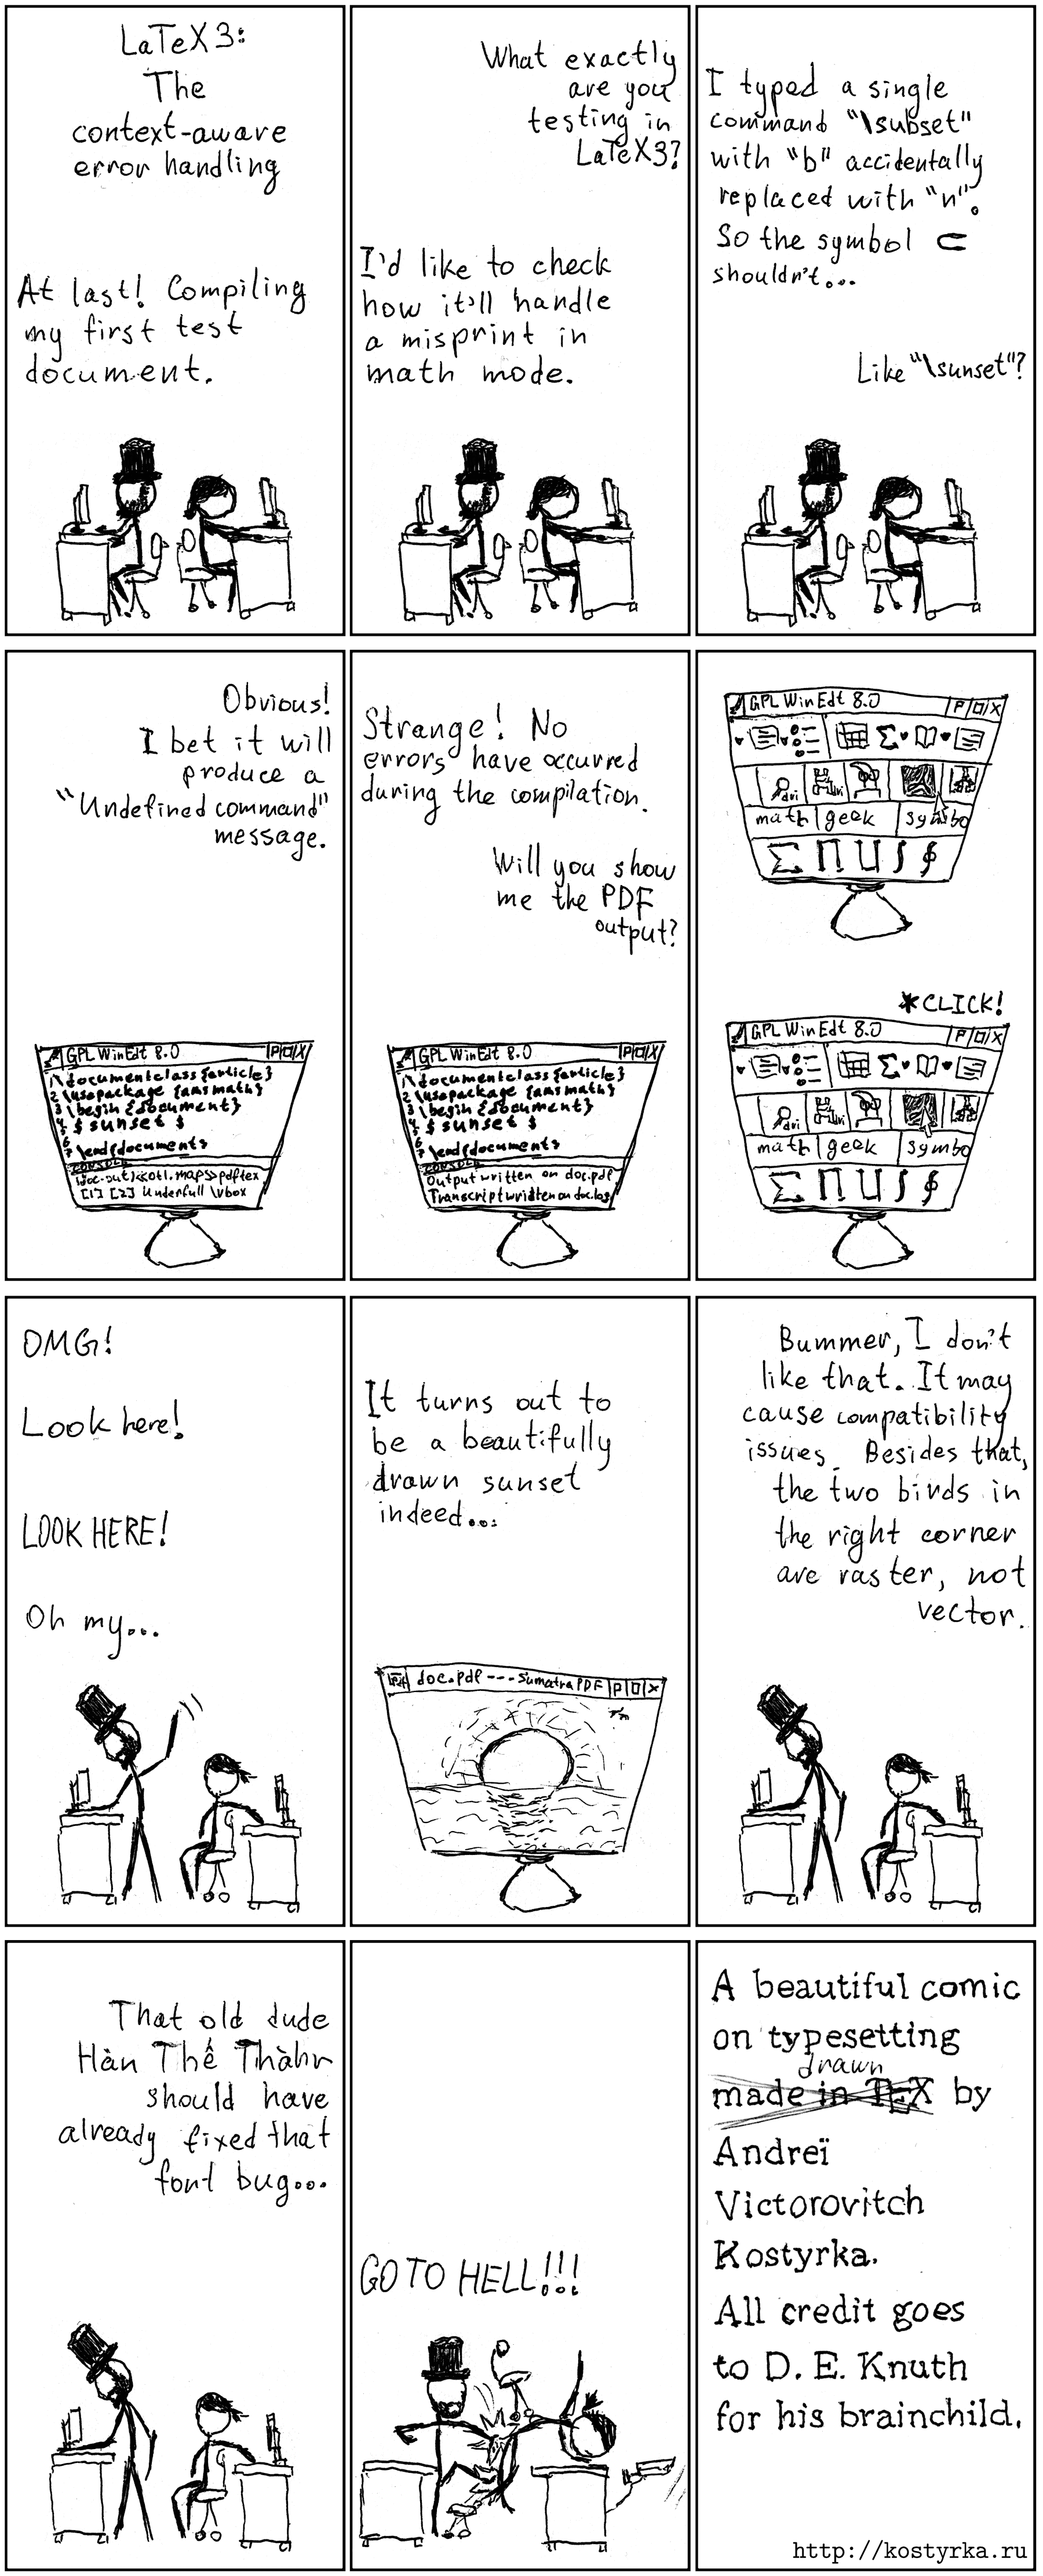 A web comic on LaTeX in xkcd style